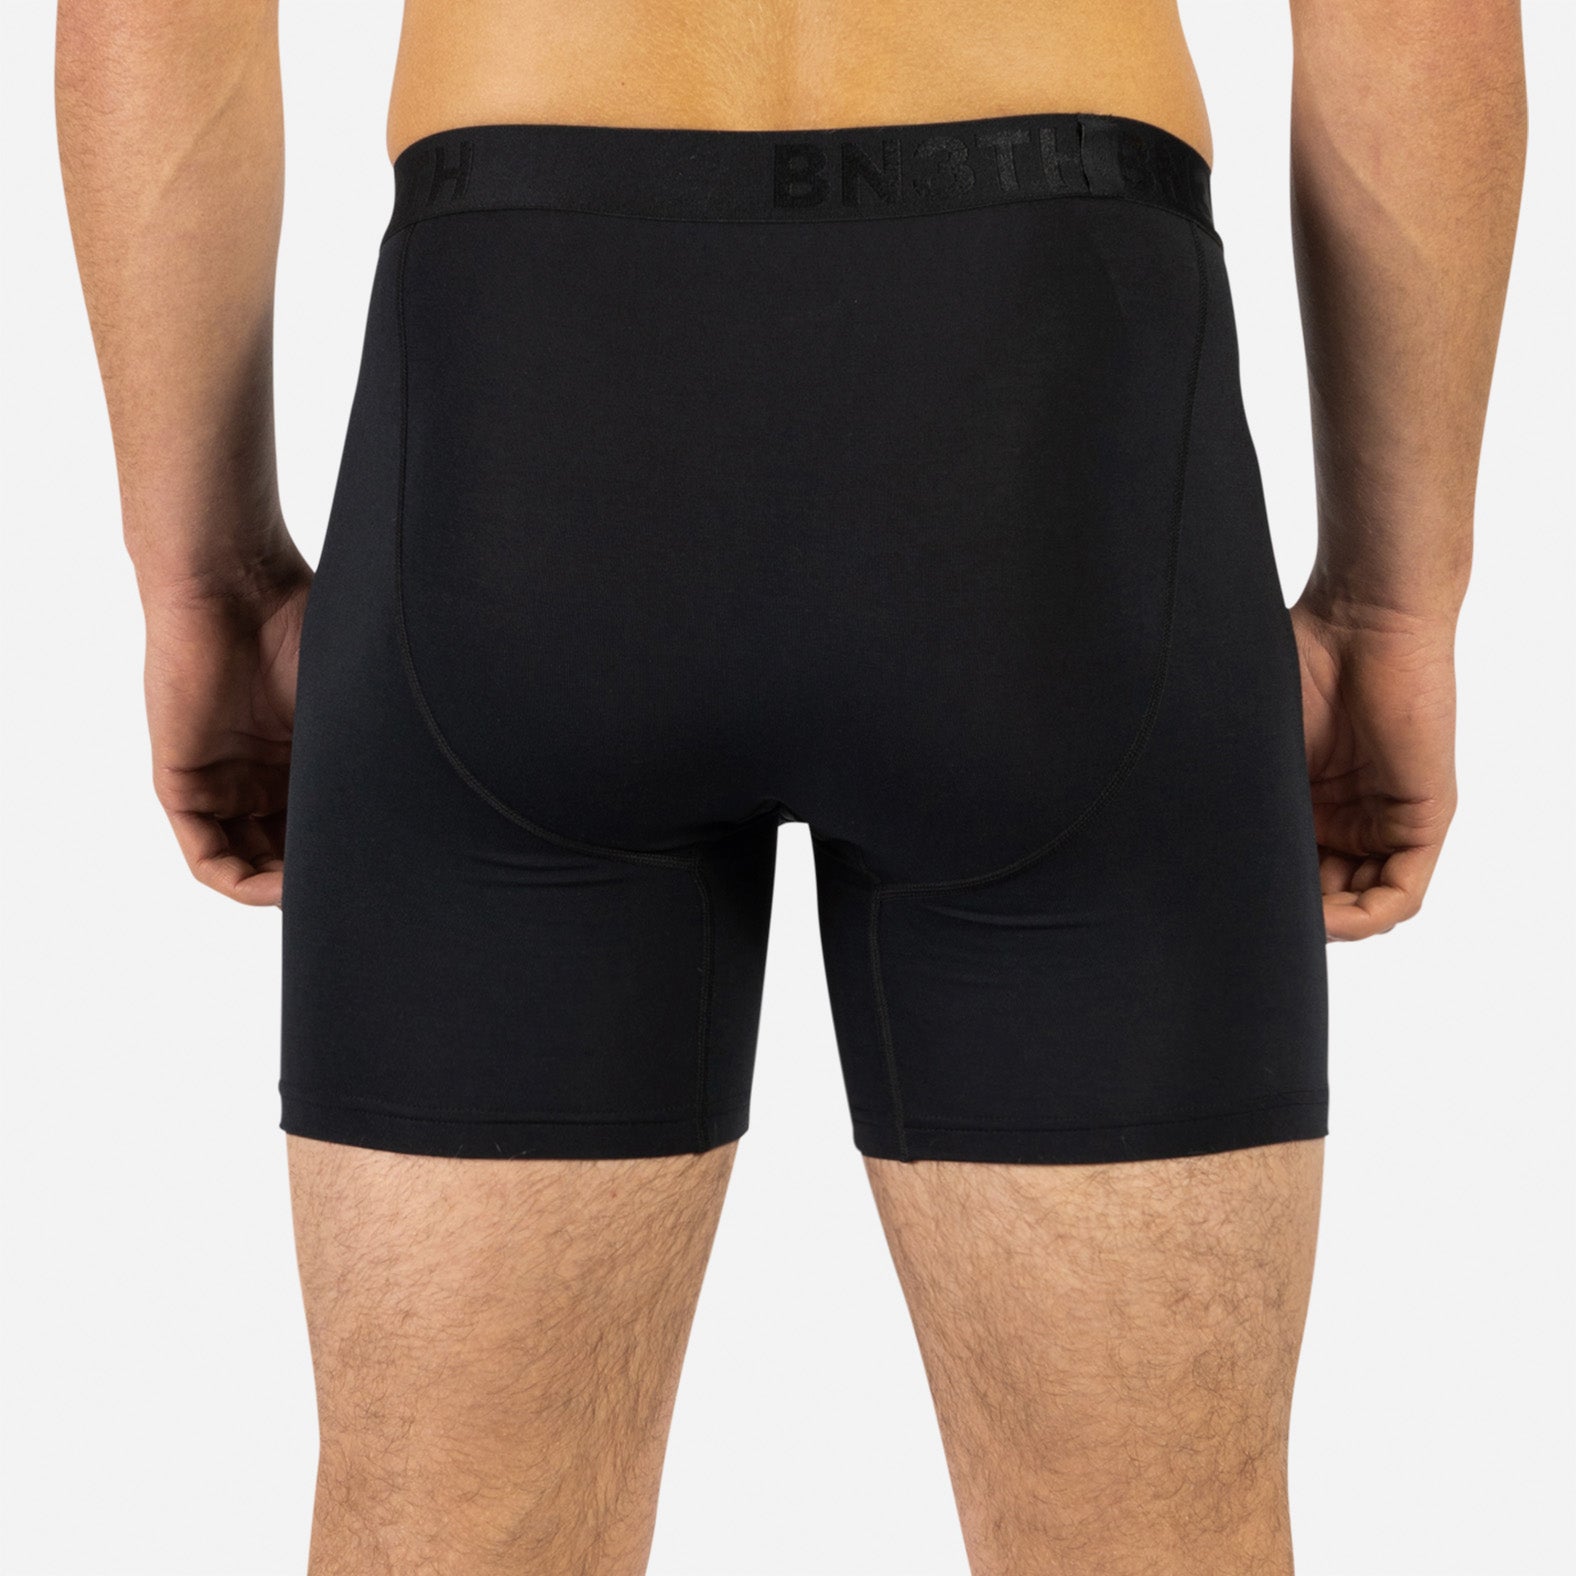 CLASSIC BOXER BRIEF WITH FLY: BLACK